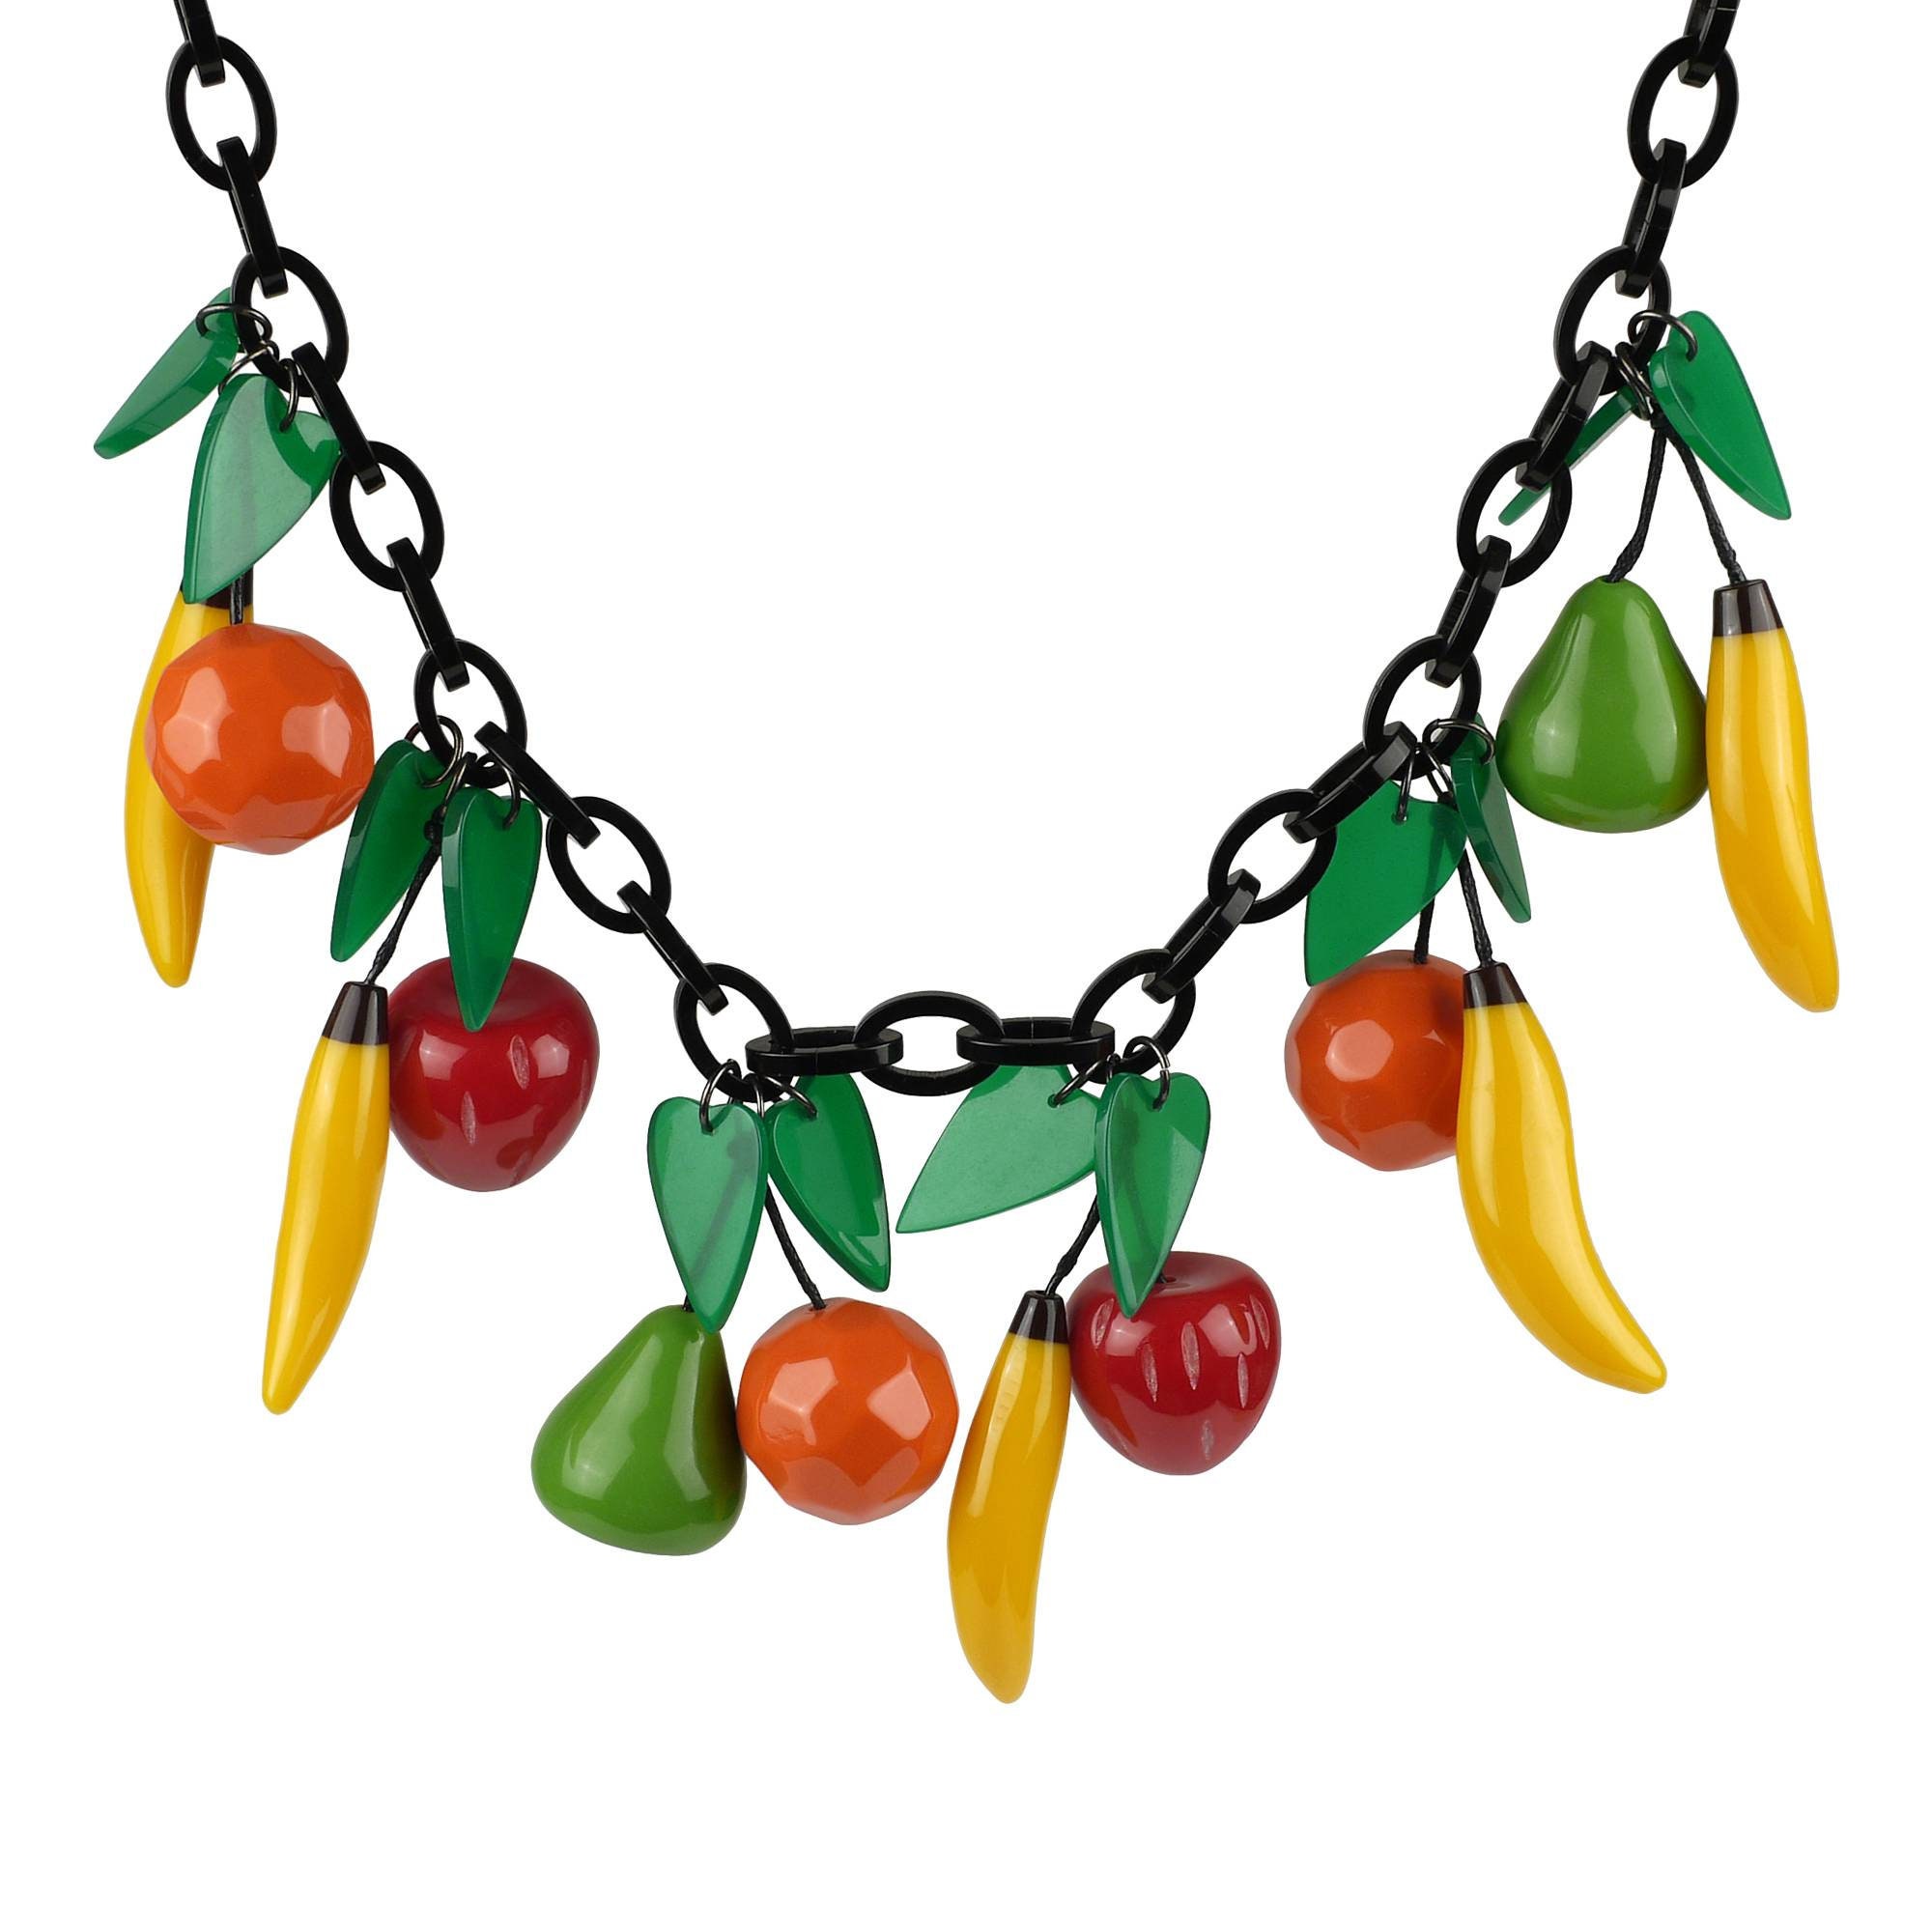 Cherry Necklace Red Cherries Jewelry Boho Necklace Red Bohemian Jewelry Statement Fruits Chunky Necklace Bib Spring Fruit Jewelry for Girls